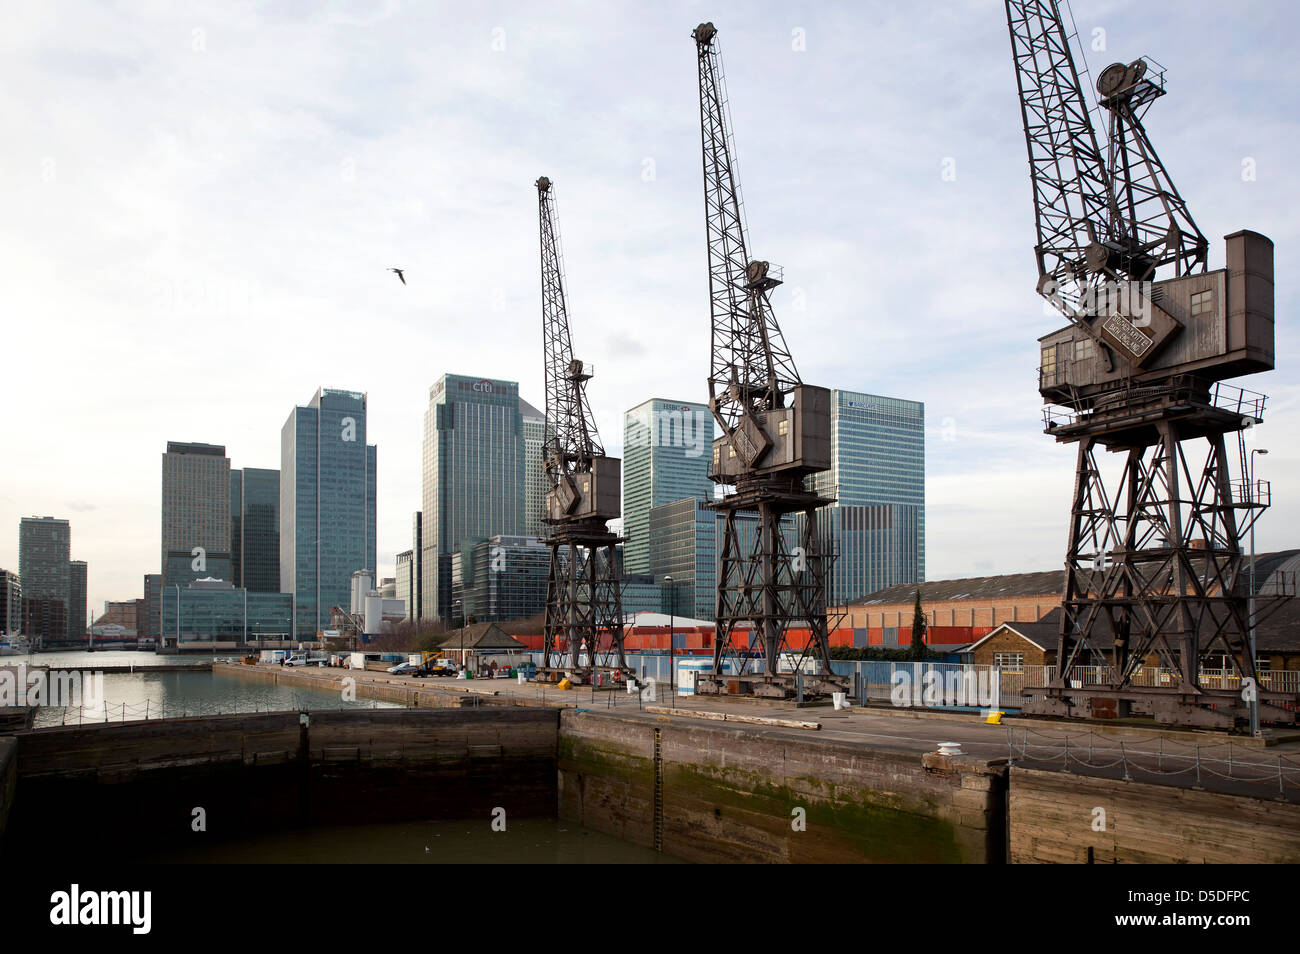 London, United Kingdom, old harbor area of Docklands with the skyscrapers in the business hub of Canary Wharf Stock Photo